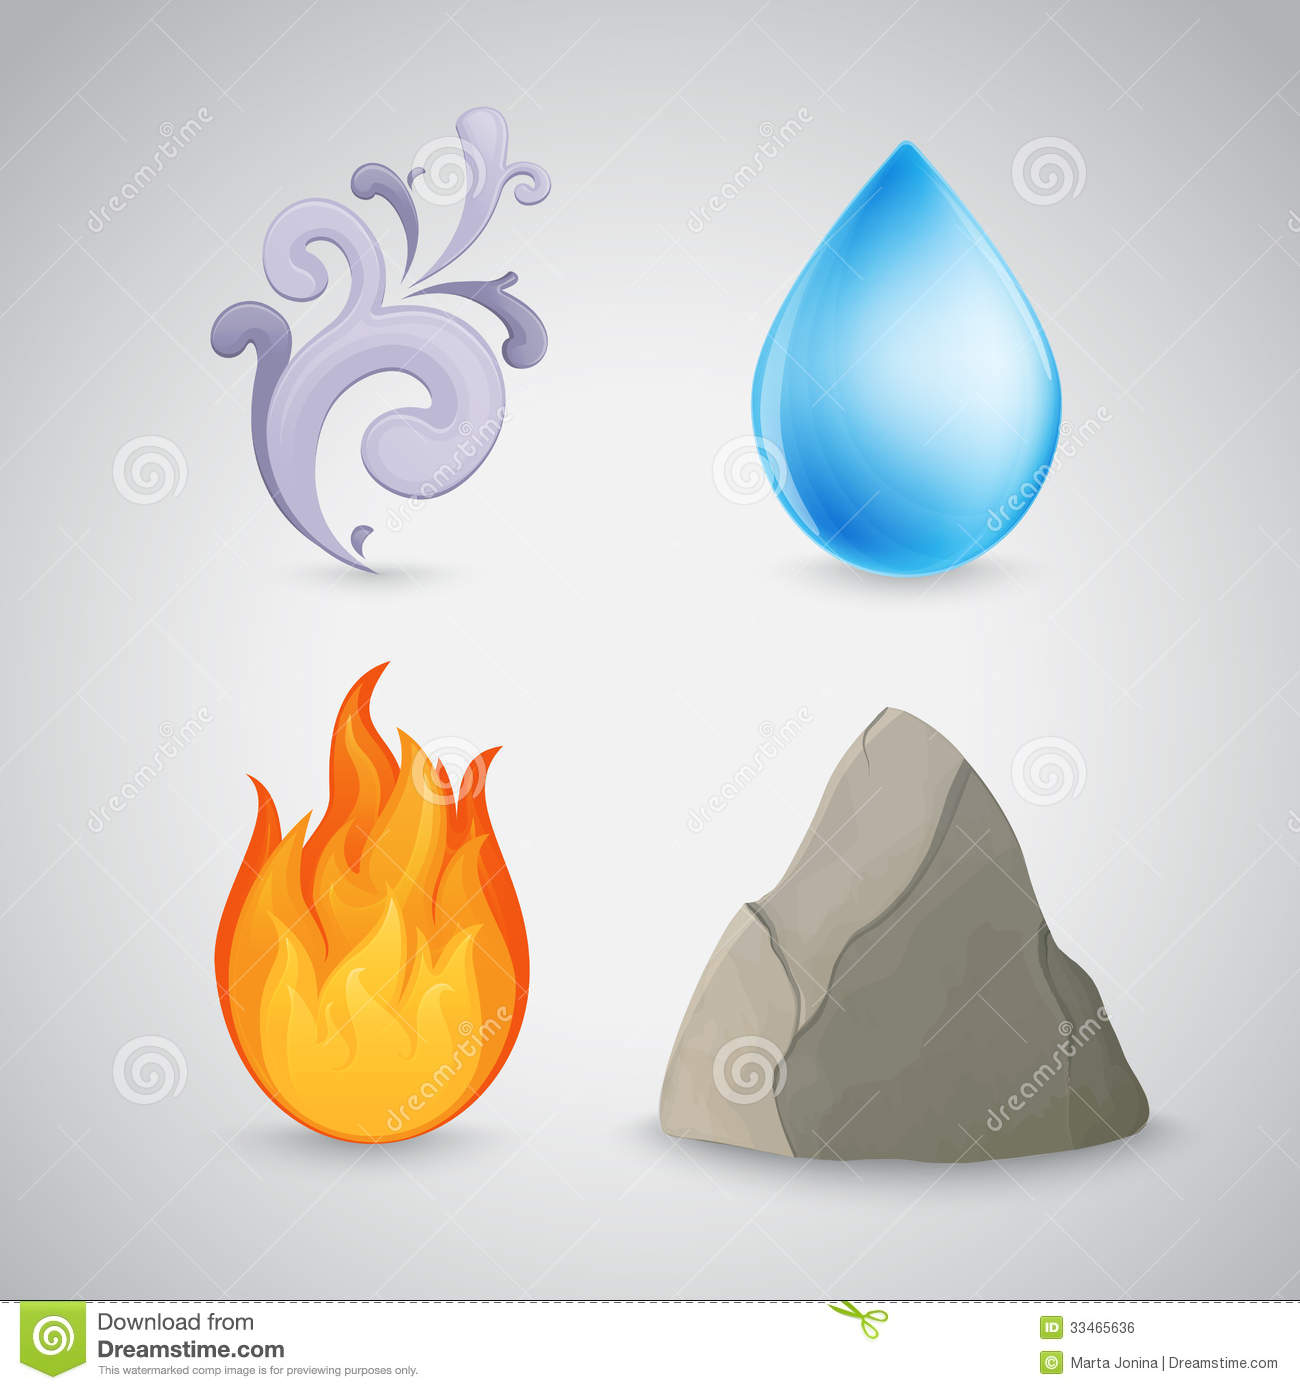 Elements Earth Air Fire and Water